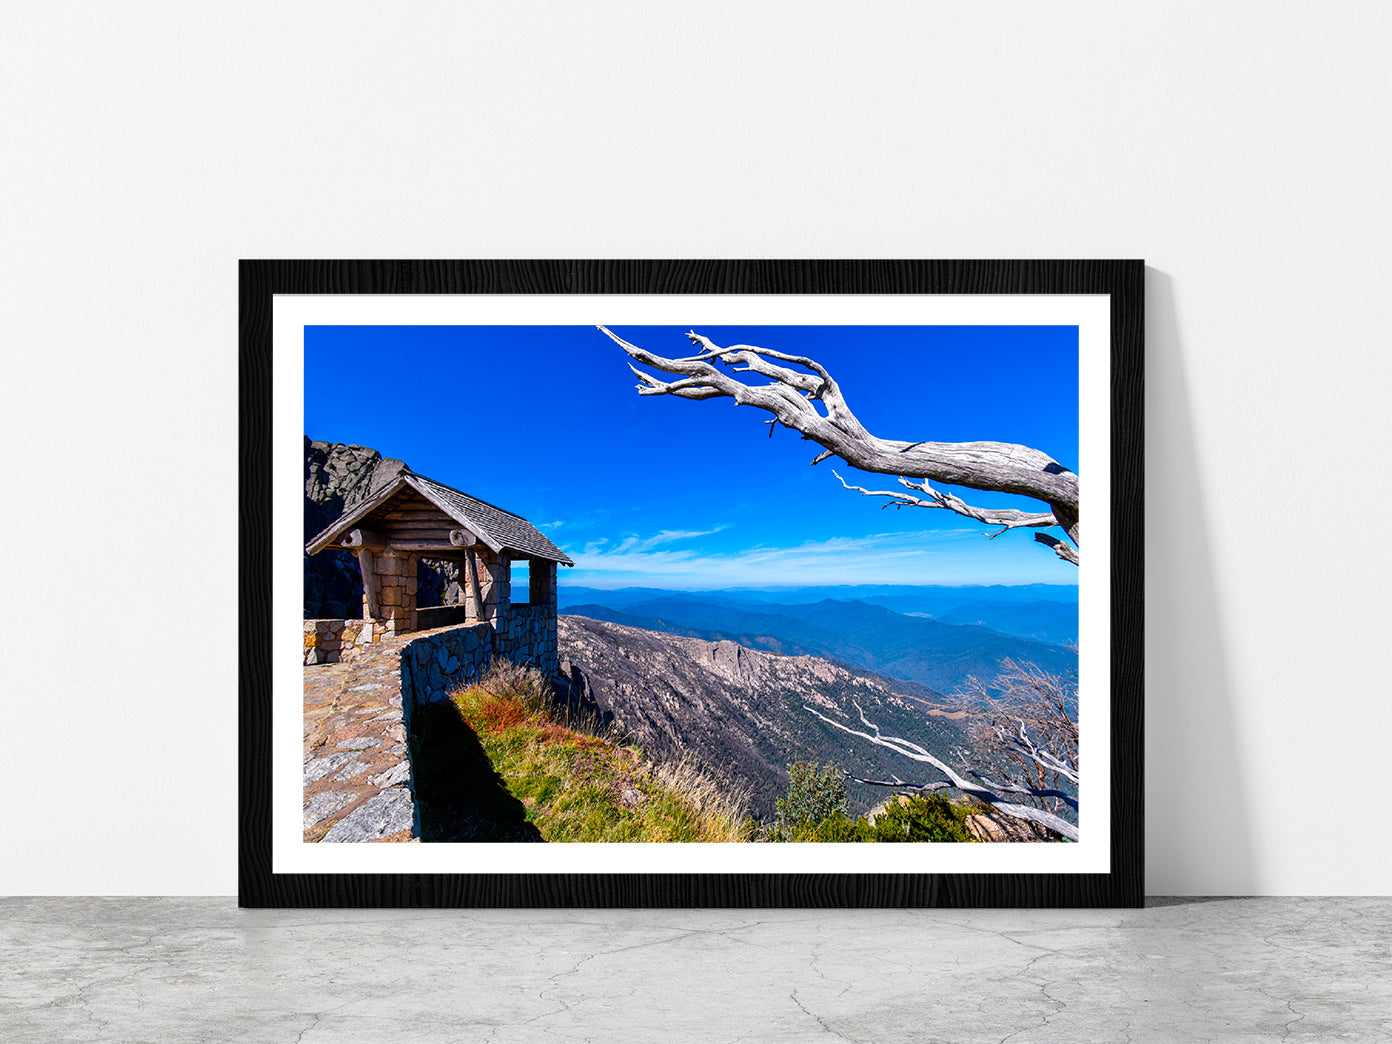 Hut On Top Of Mountain Blue Sky Glass Framed Wall Art, Ready to Hang Quality Print With White Border Black